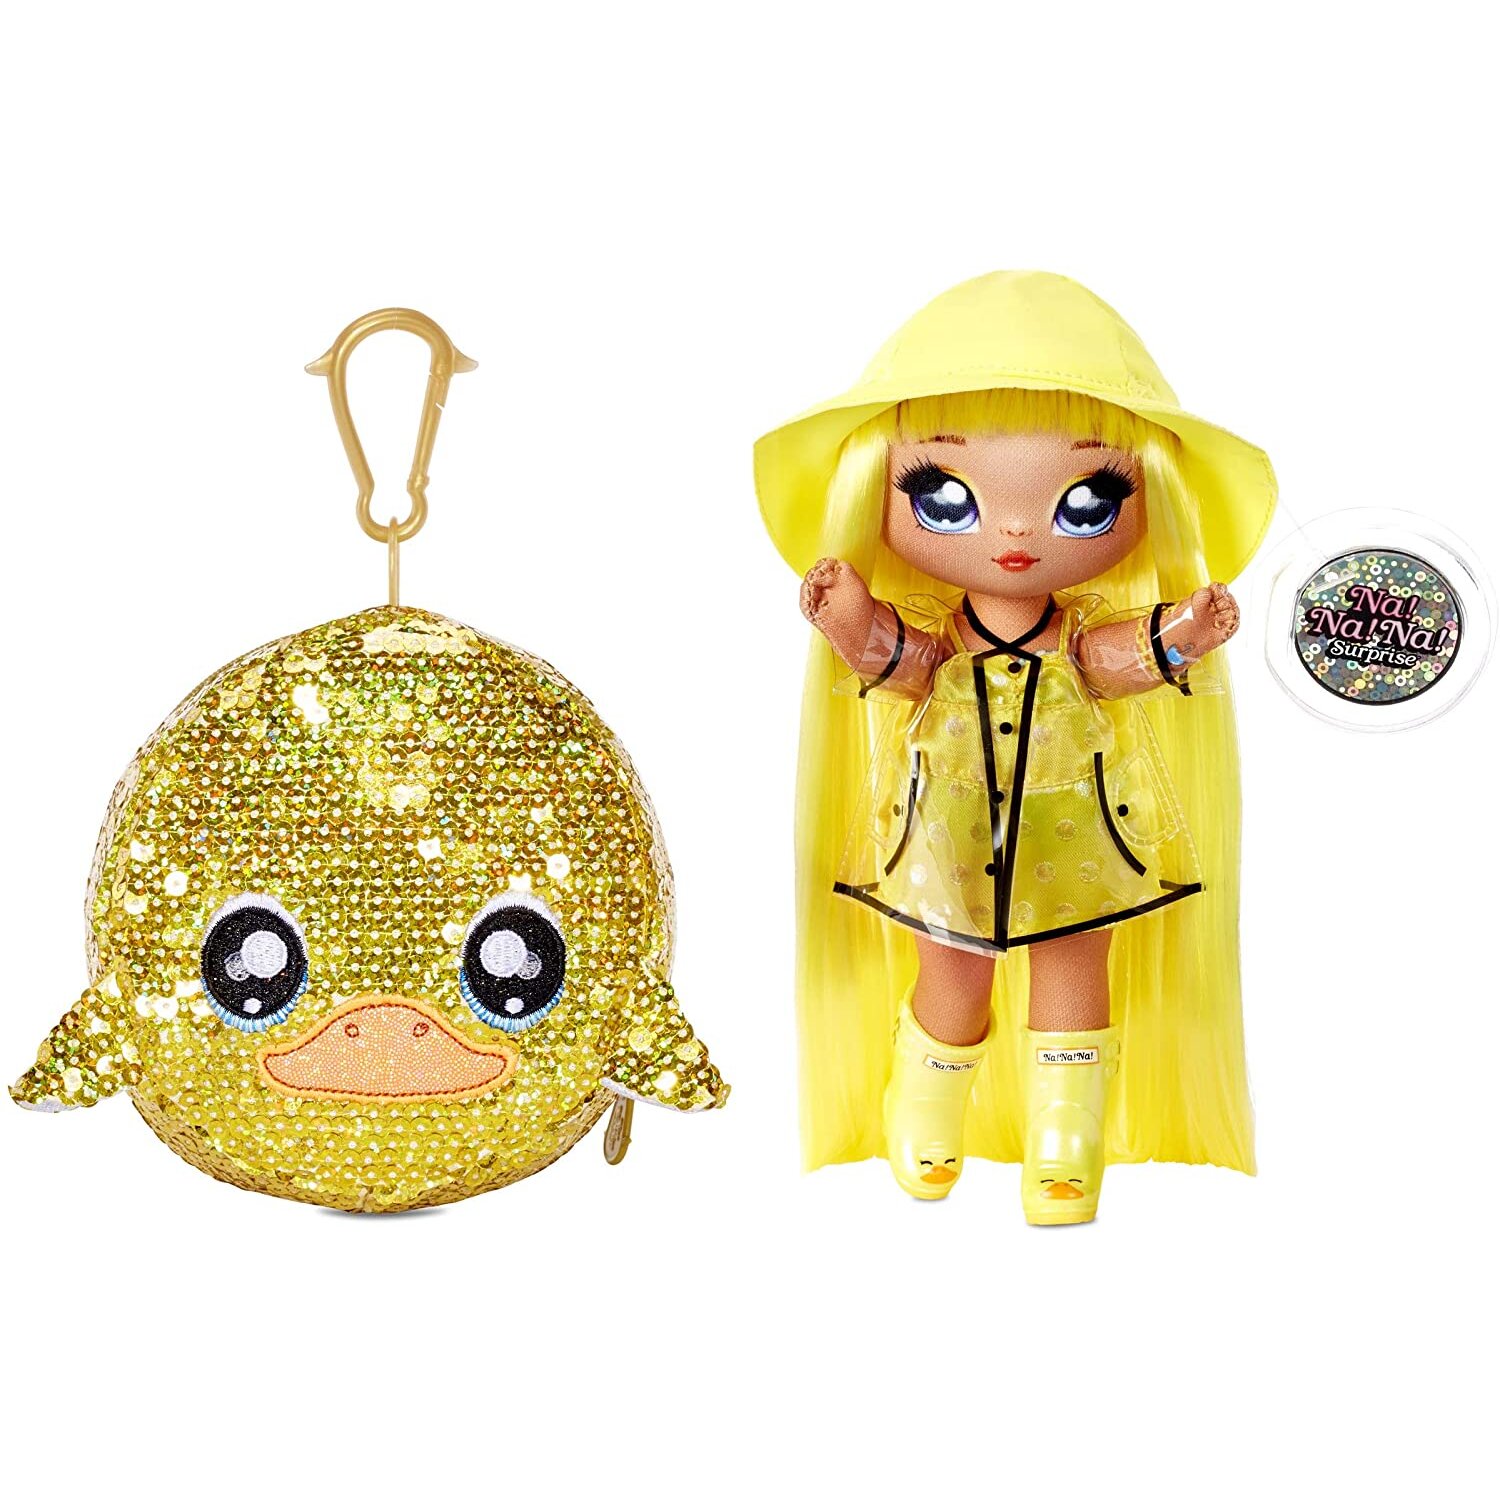 Na Na Na Surprise 2-in-1 Fashion Doll And Sparkly Pom Purse, DARIA DUCKIE. Raincoat Doll With Luxury Outfits and Fashion Accessories. Sparkle Series.